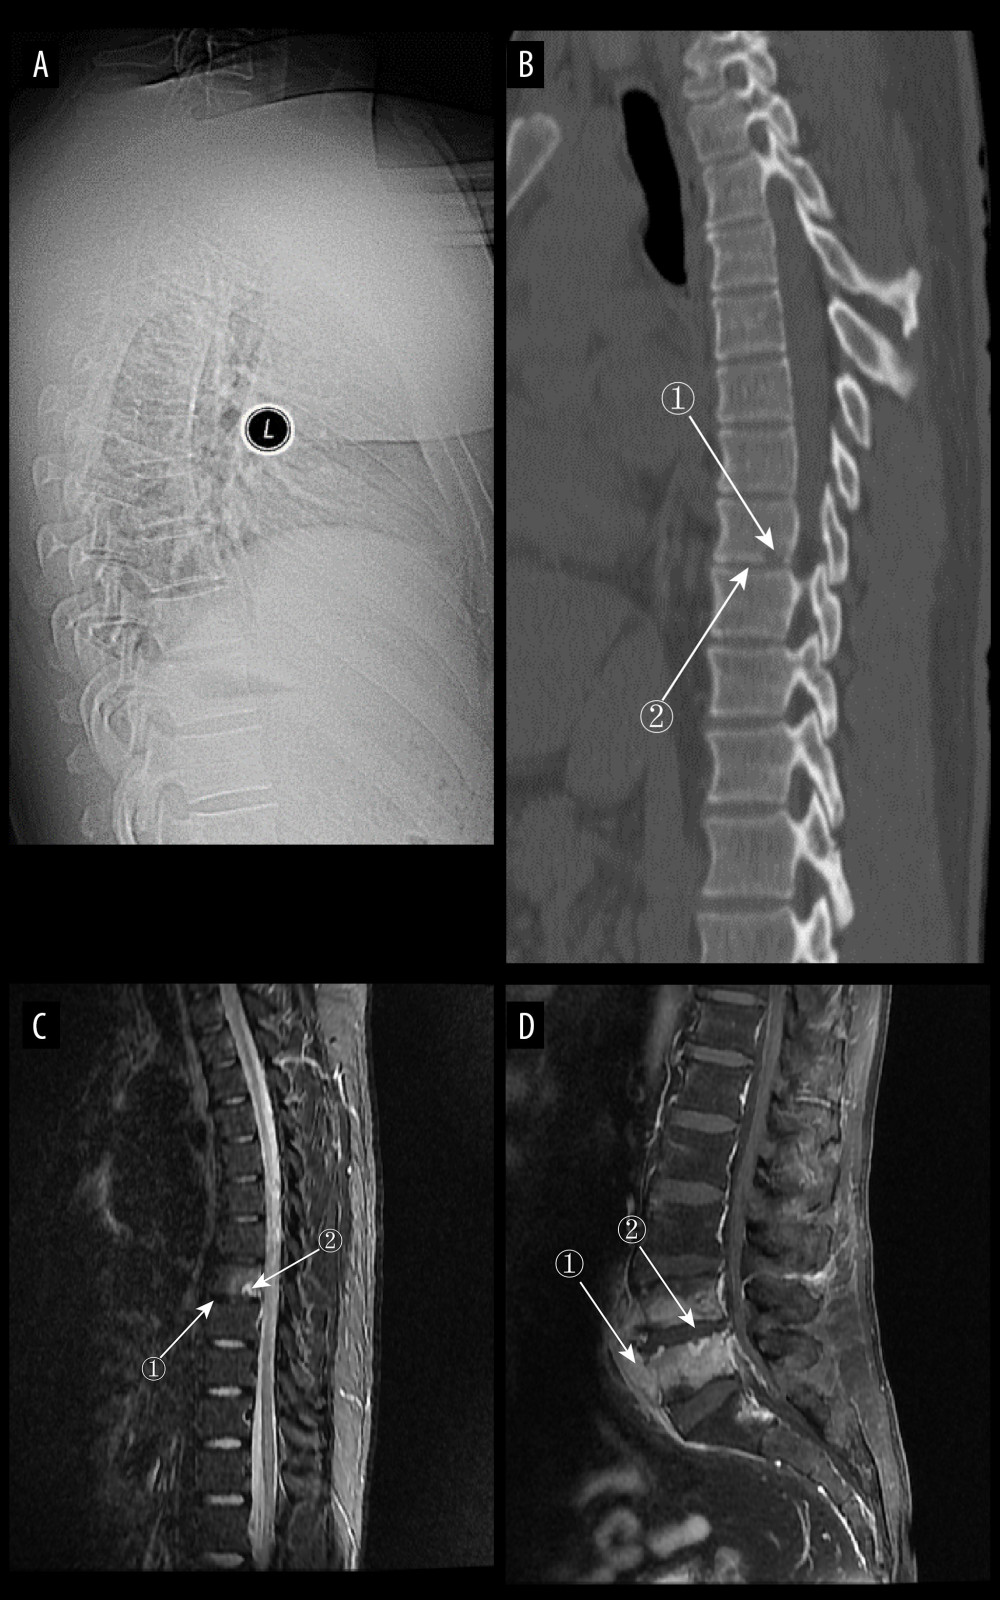 (A) Plain radiograph of early tuberculous spondylitis (TS). No abnormal vertebral changes. (A–C) Images of the same patient, with an interval of 120 days between onset of symptoms and the first radiograph. (B) Plain computed tomography in early TS. There is a less dense lesion with poorly defined borders and no obvious sclerotic bands at marker 1, and an uneroded disc is visible at marker 2. (C) Magnetic resonance imaging (MRI) in early stages of TS. Marker 1 shows that the disc has not received erosion and marker 2 shows an abnormal high signal lesion in the T8 vertebral body. (D) MRI in early stages of TS. Marker 1 shows an abnormally reinforcing shadow in the paravertebral soft tissue, and marker 2 shows relative preservation of the disc, at 120 days between symptom onset and radiograph in this patient (Adobe Illustrator 2022. 26.5. Adobe Inc.).